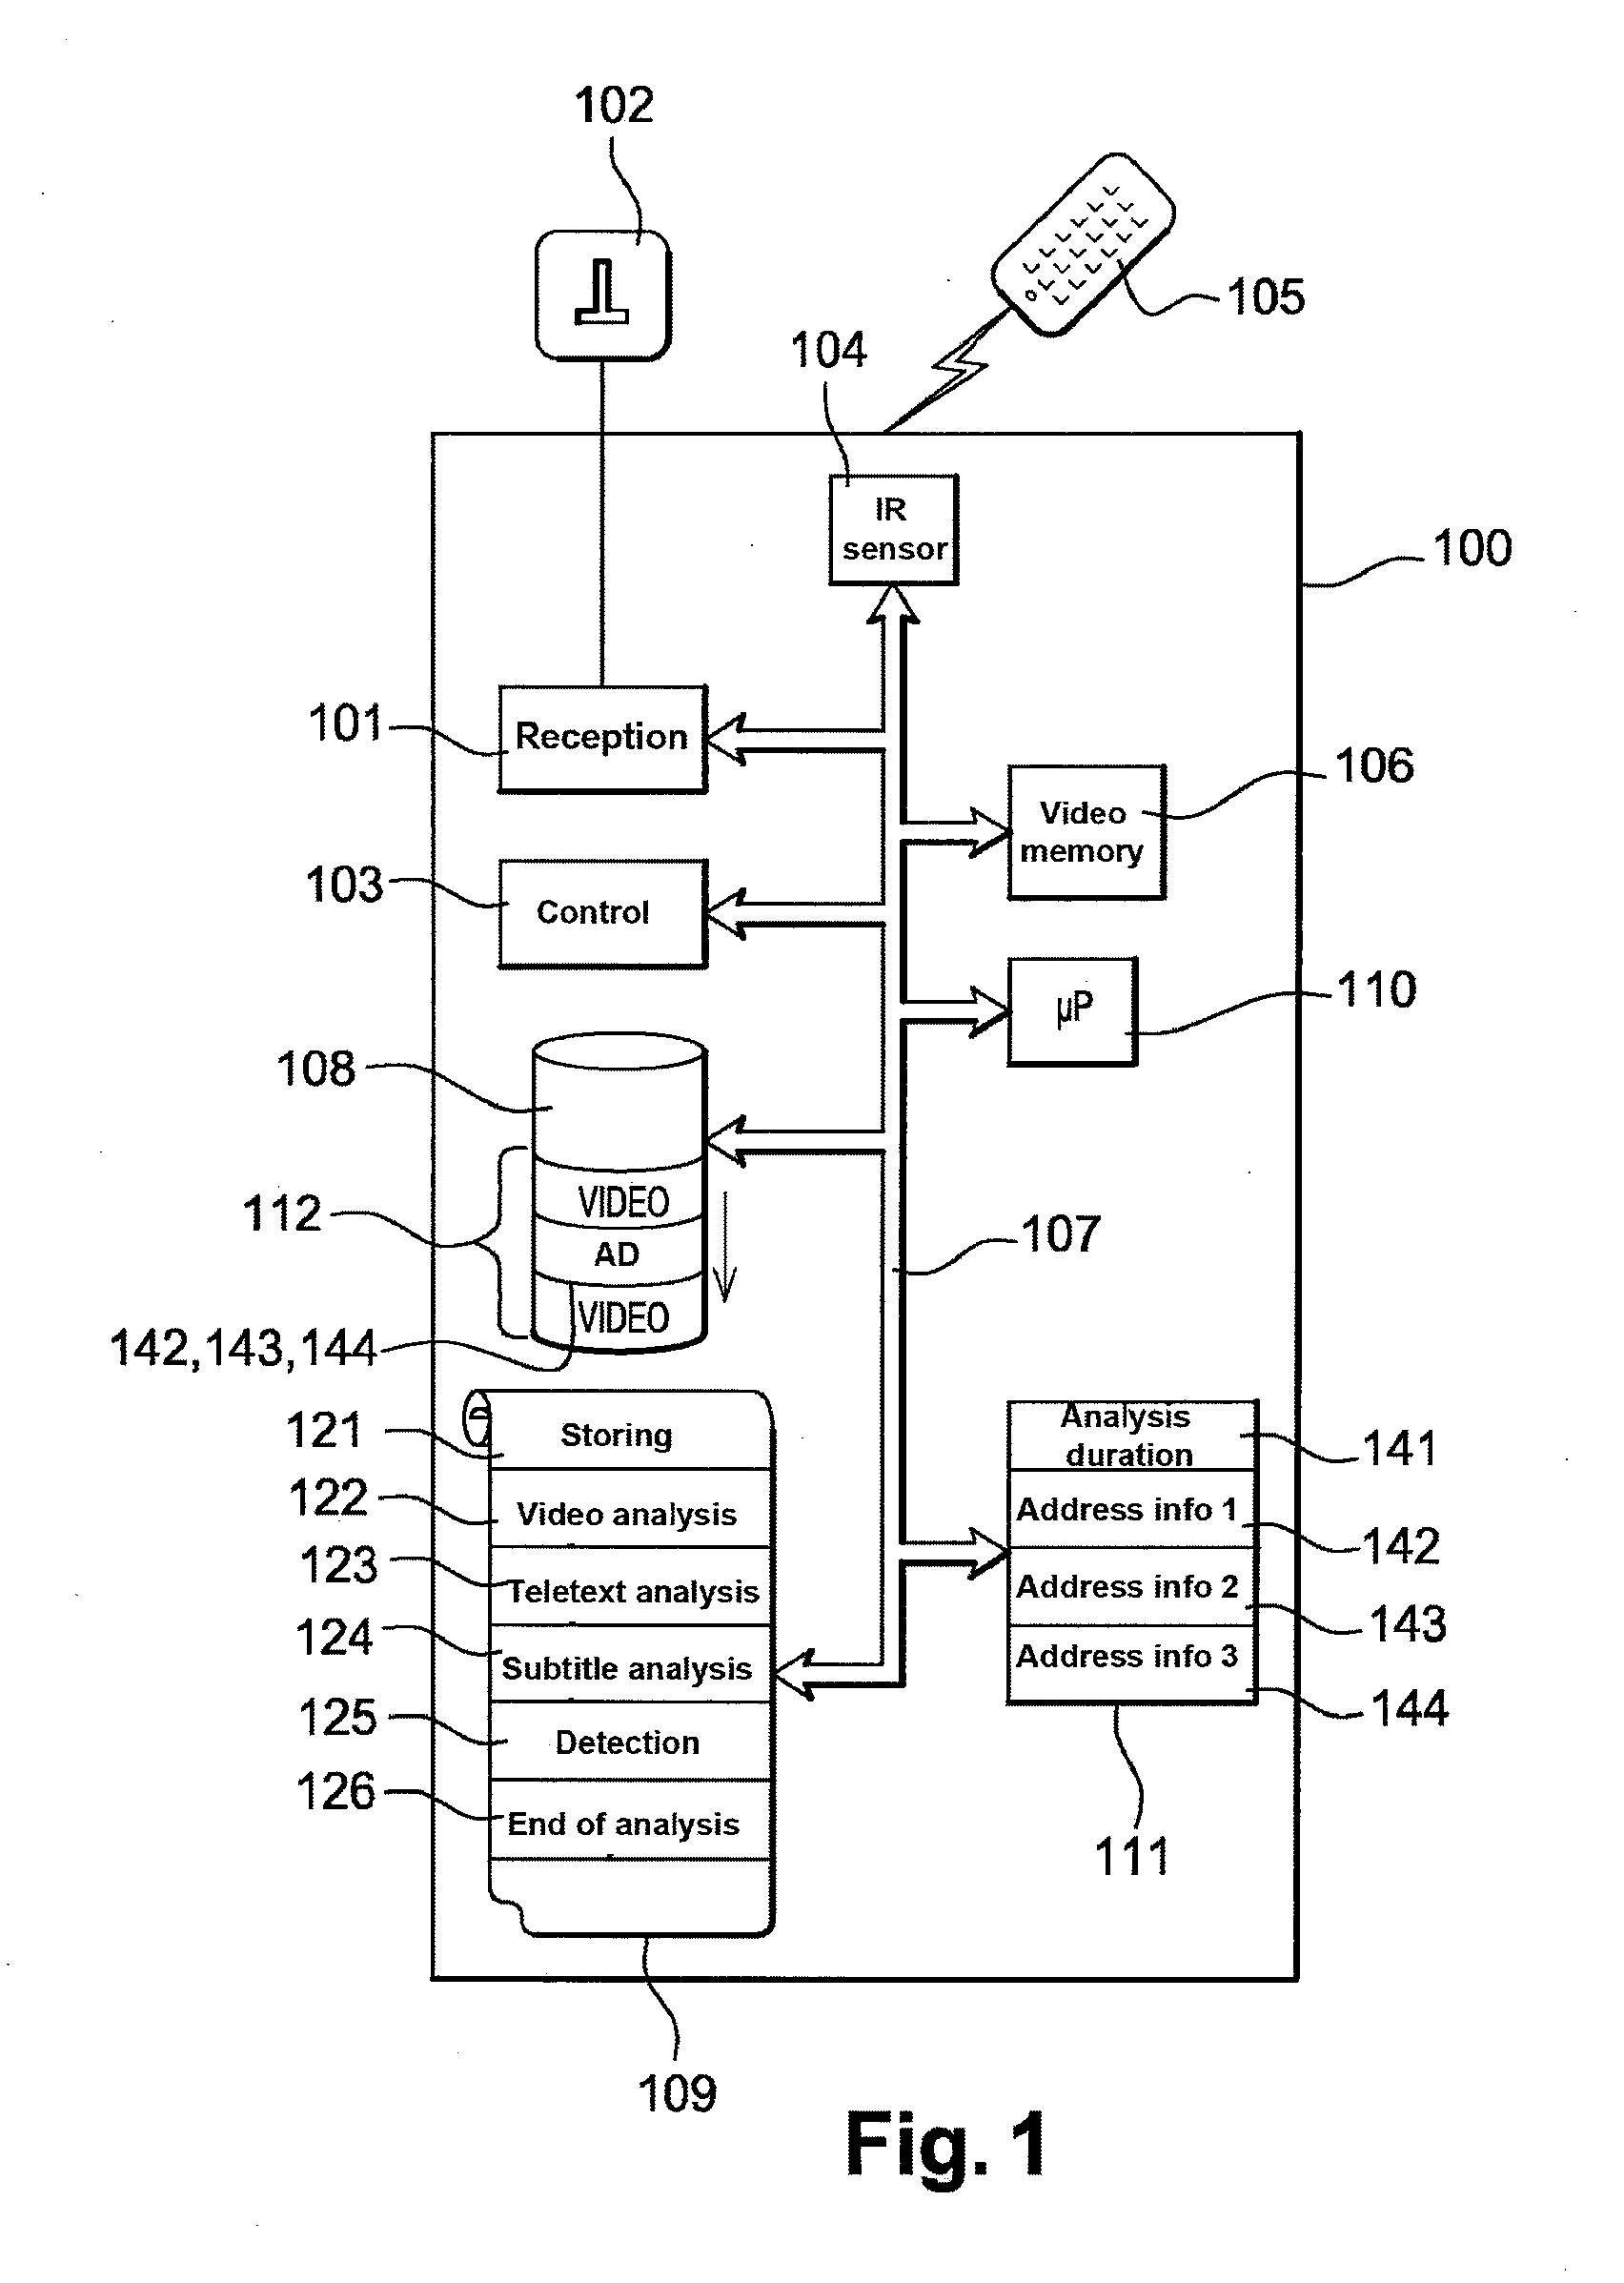 System for managing detection of advertisements in an electronic device, for example in a digital TV decoder